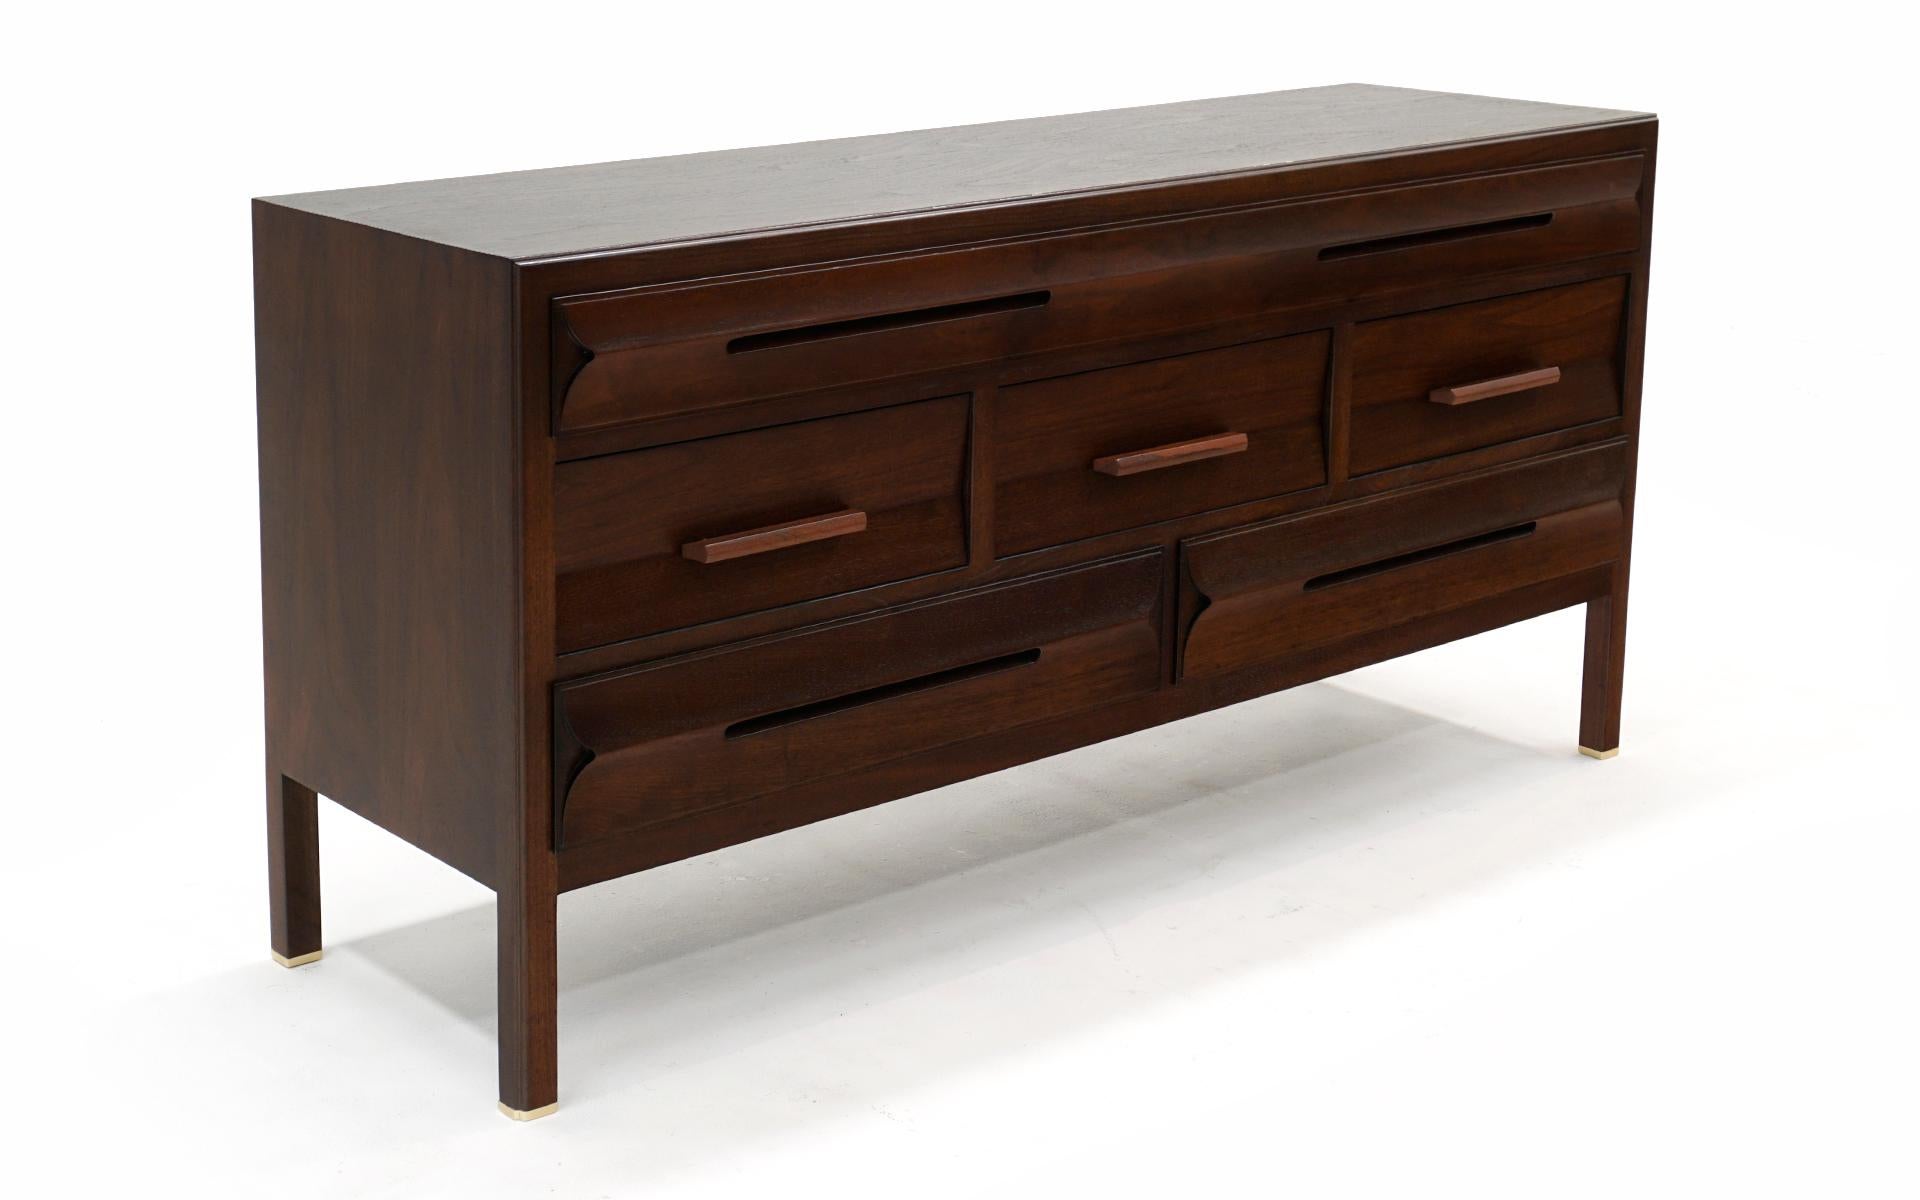 American Sculptural Dresser in Walnut with Brass Accents by Edward Wormley for Dunbar